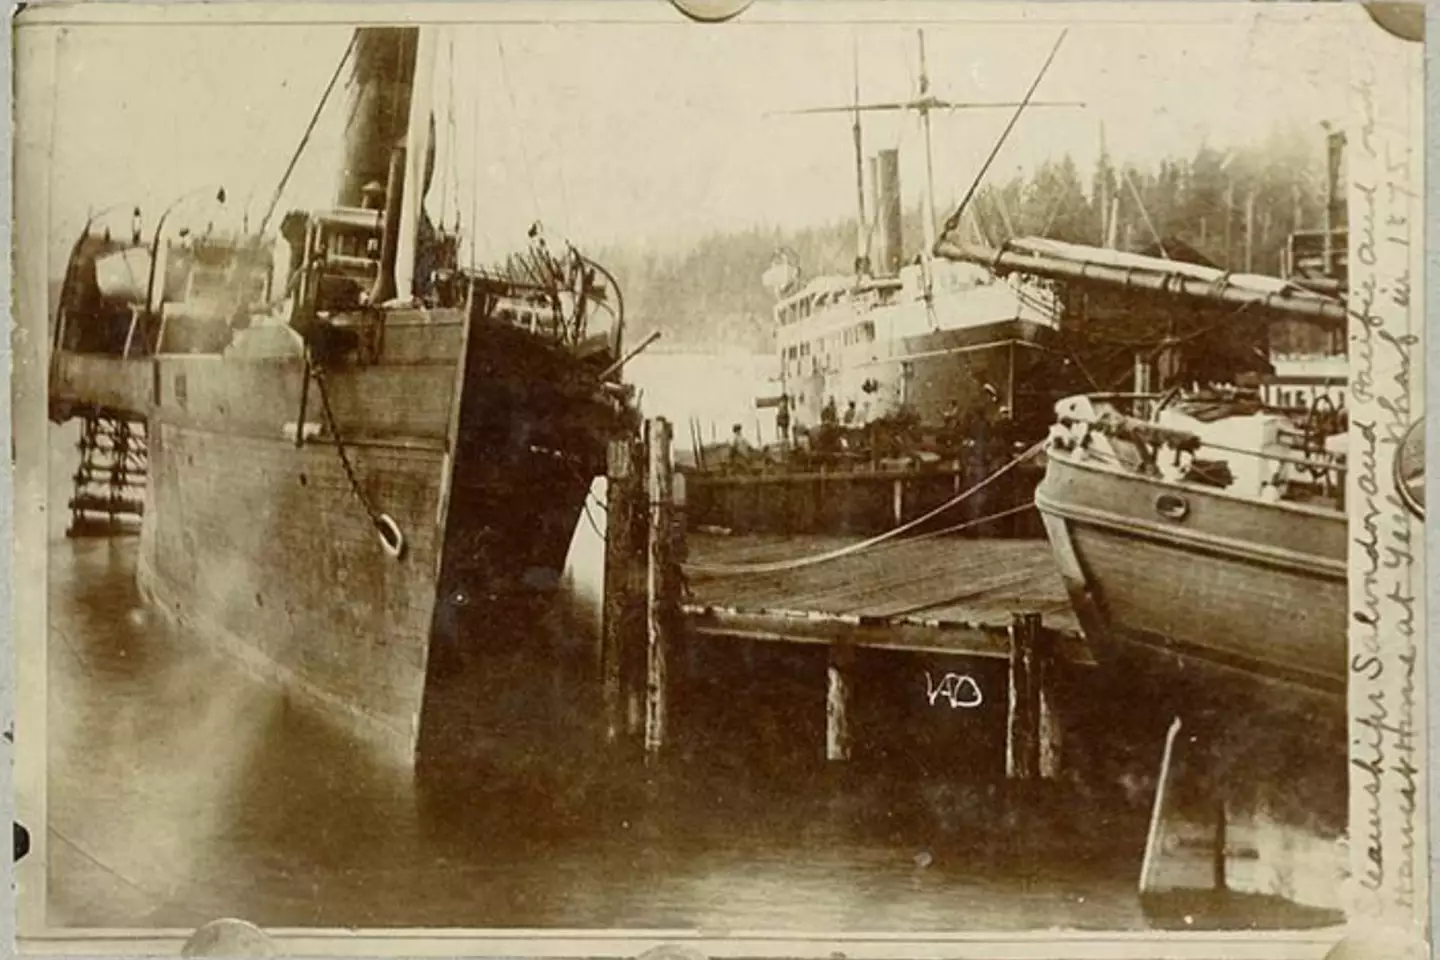 The steamer has been lost for more than a century.